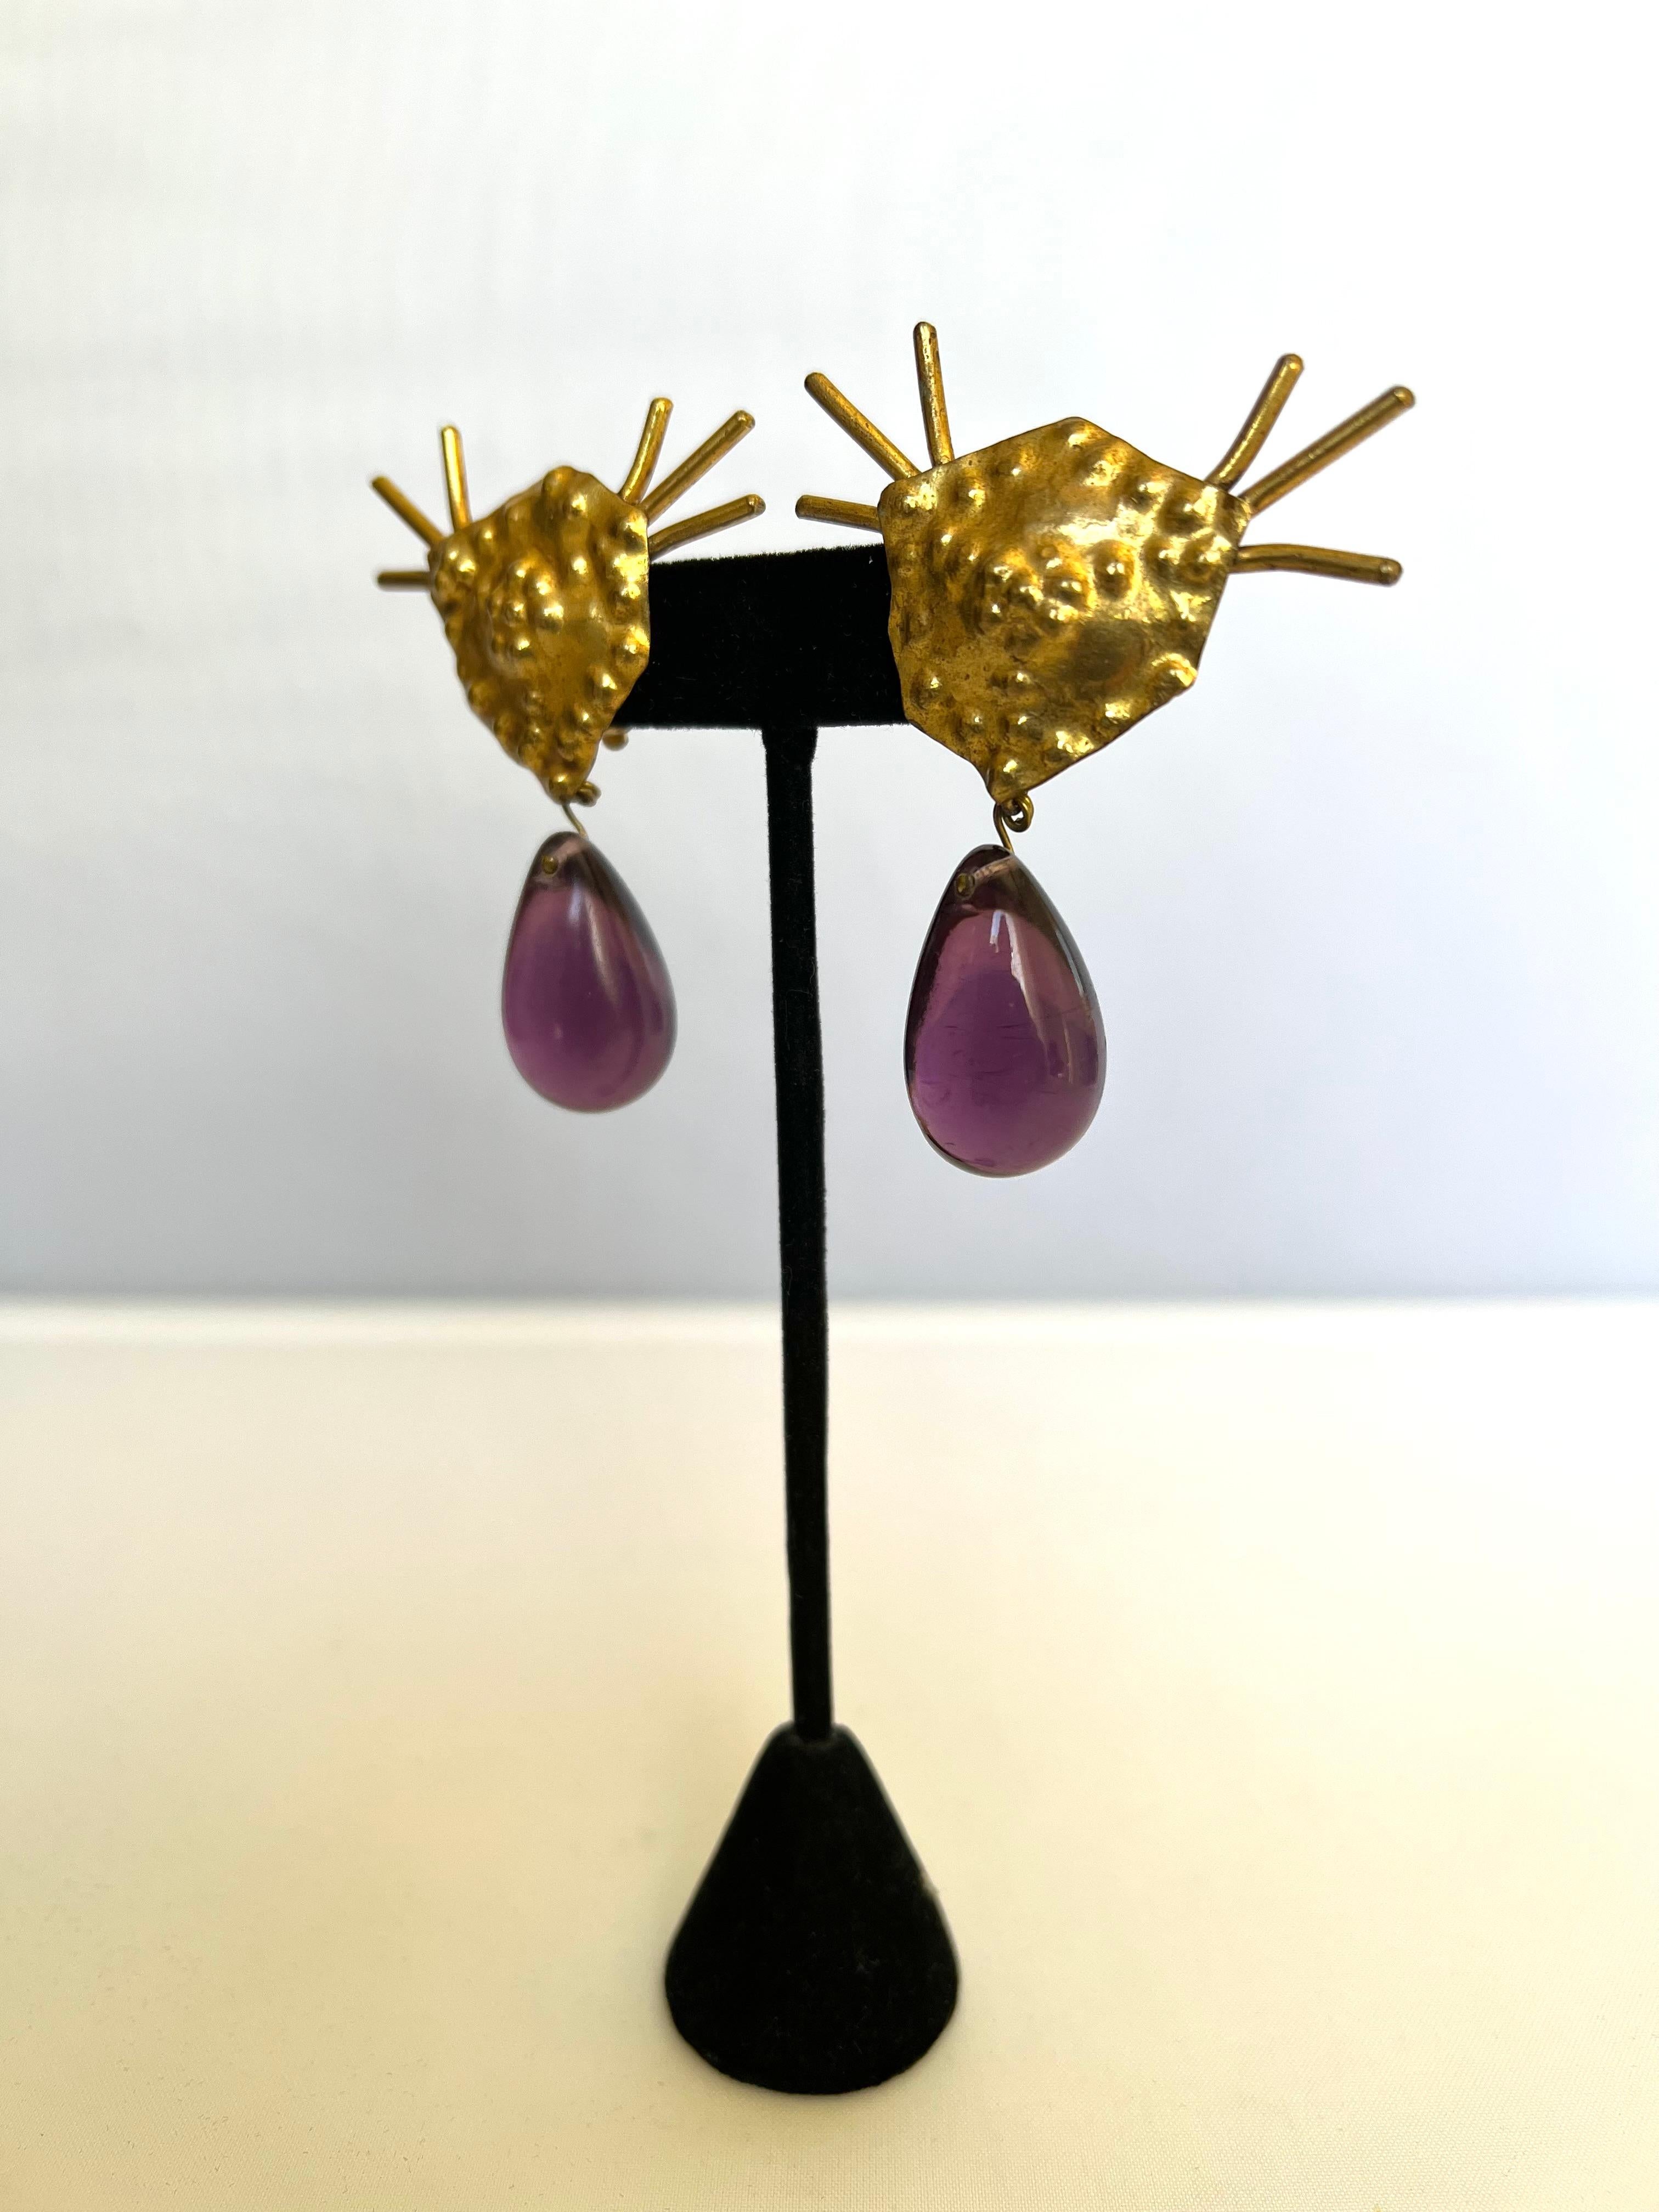 Vintage artisan Herve Van Der Straeten hammered gilt metal architectural earrings with purple glass drops, made in France circa 1980/90 - signed on the back.